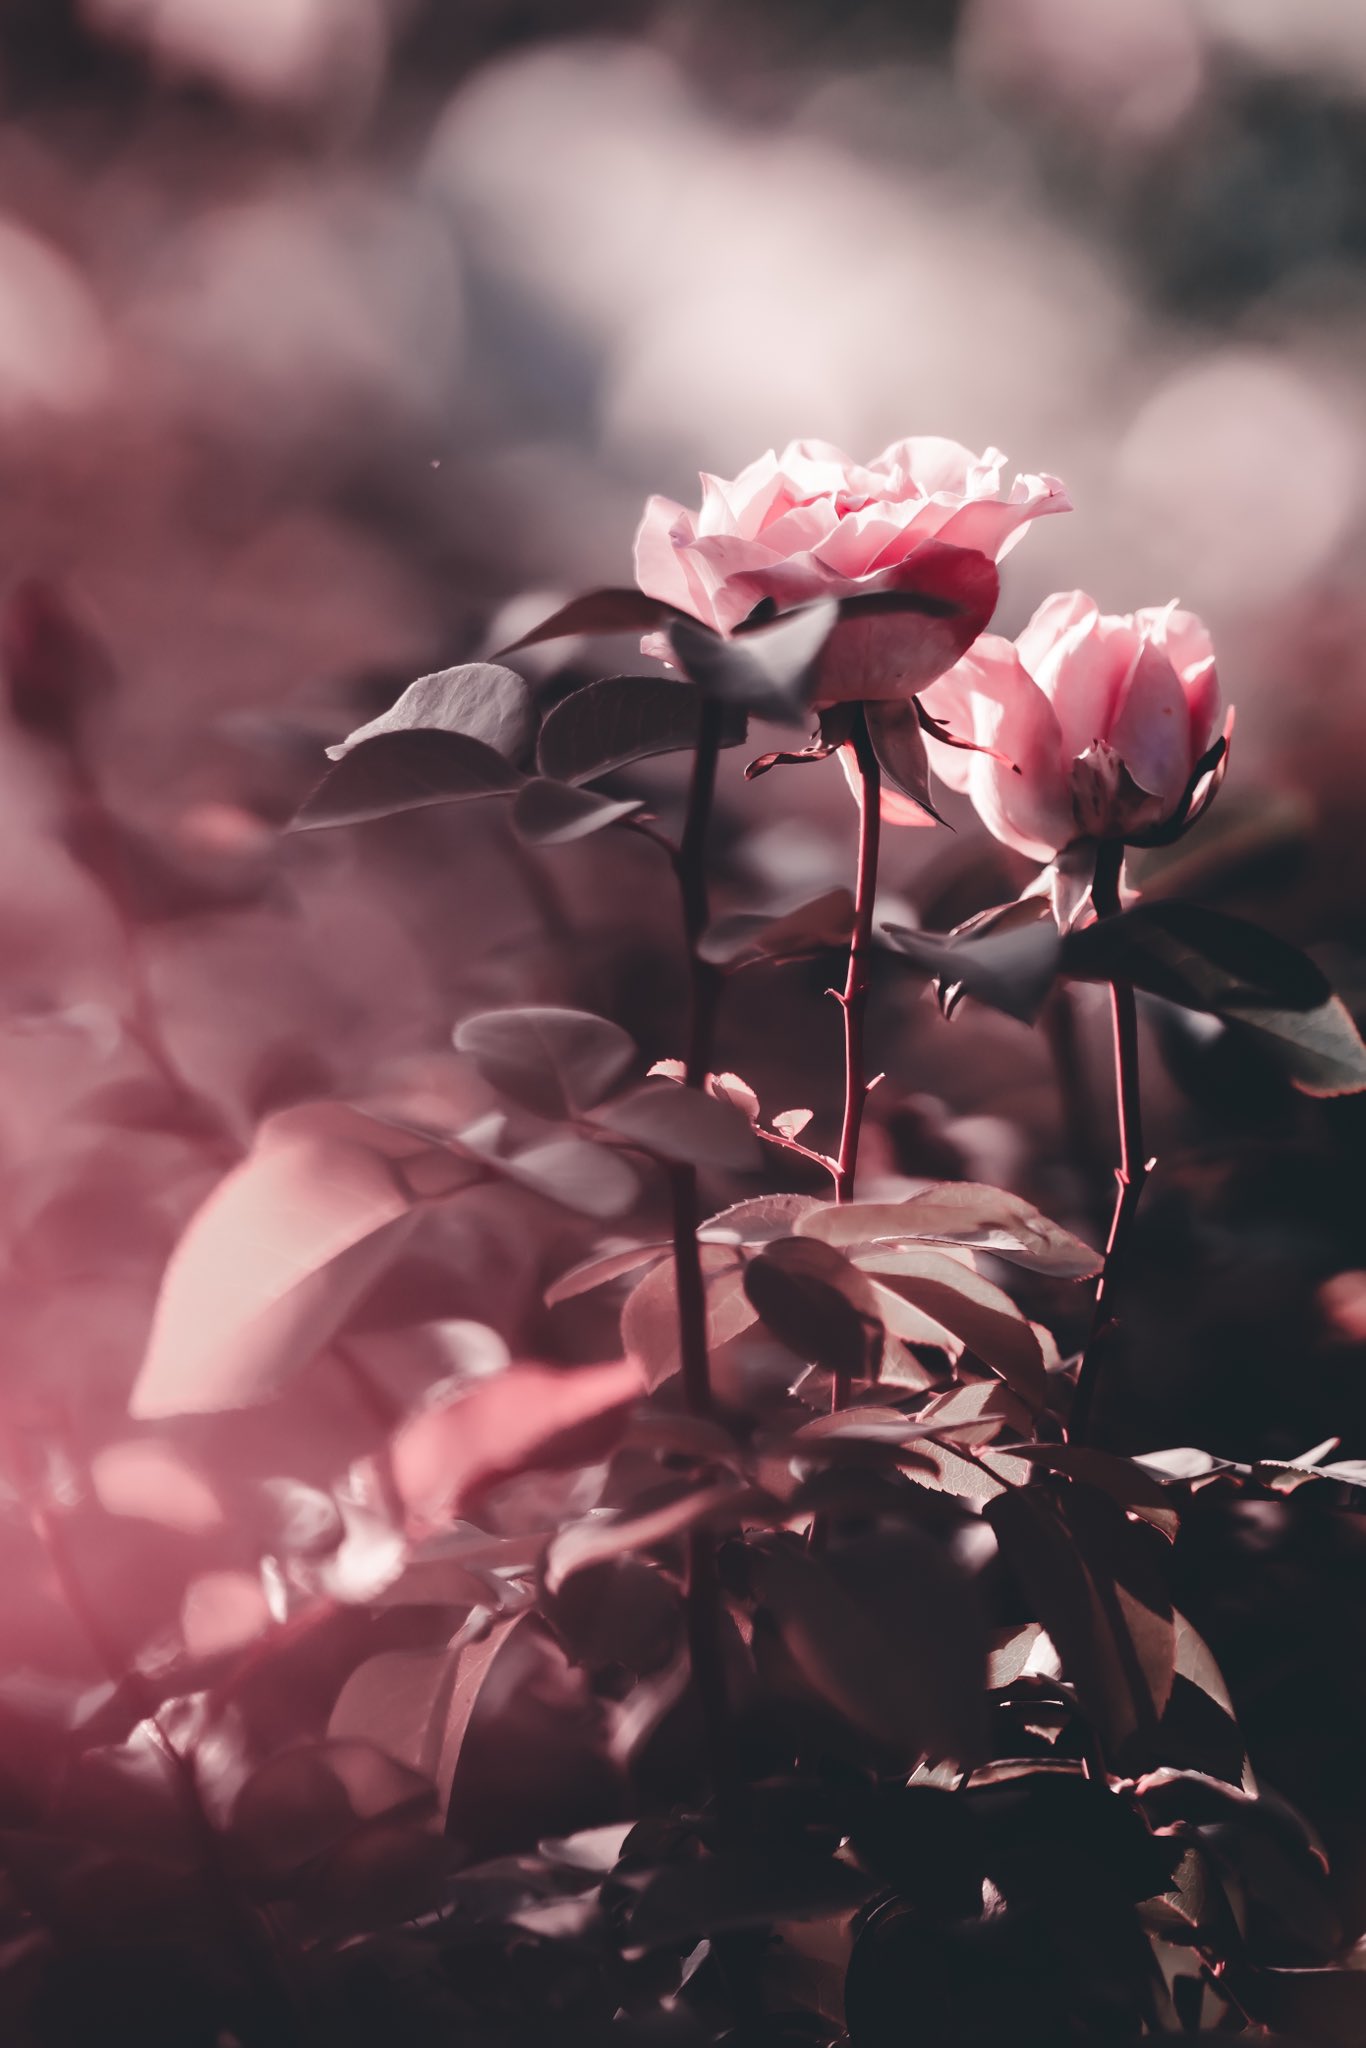 Pink roses photographed in warm light with a shallow depth of field and bokeh